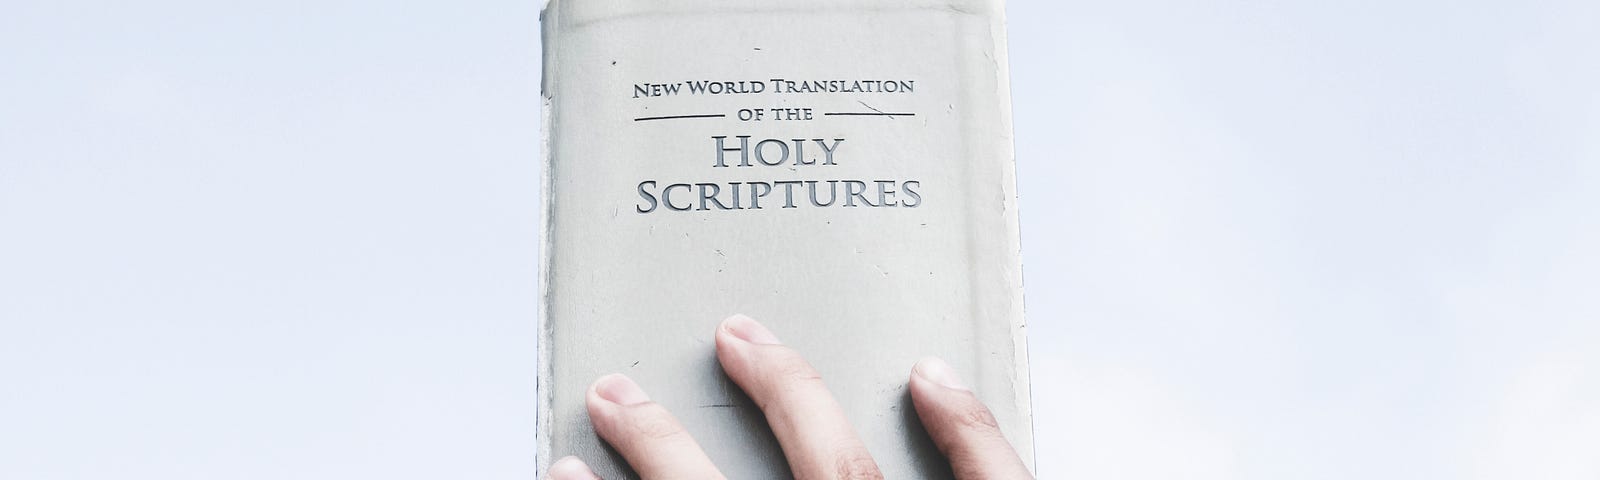 Swearing on the Holy Bible.